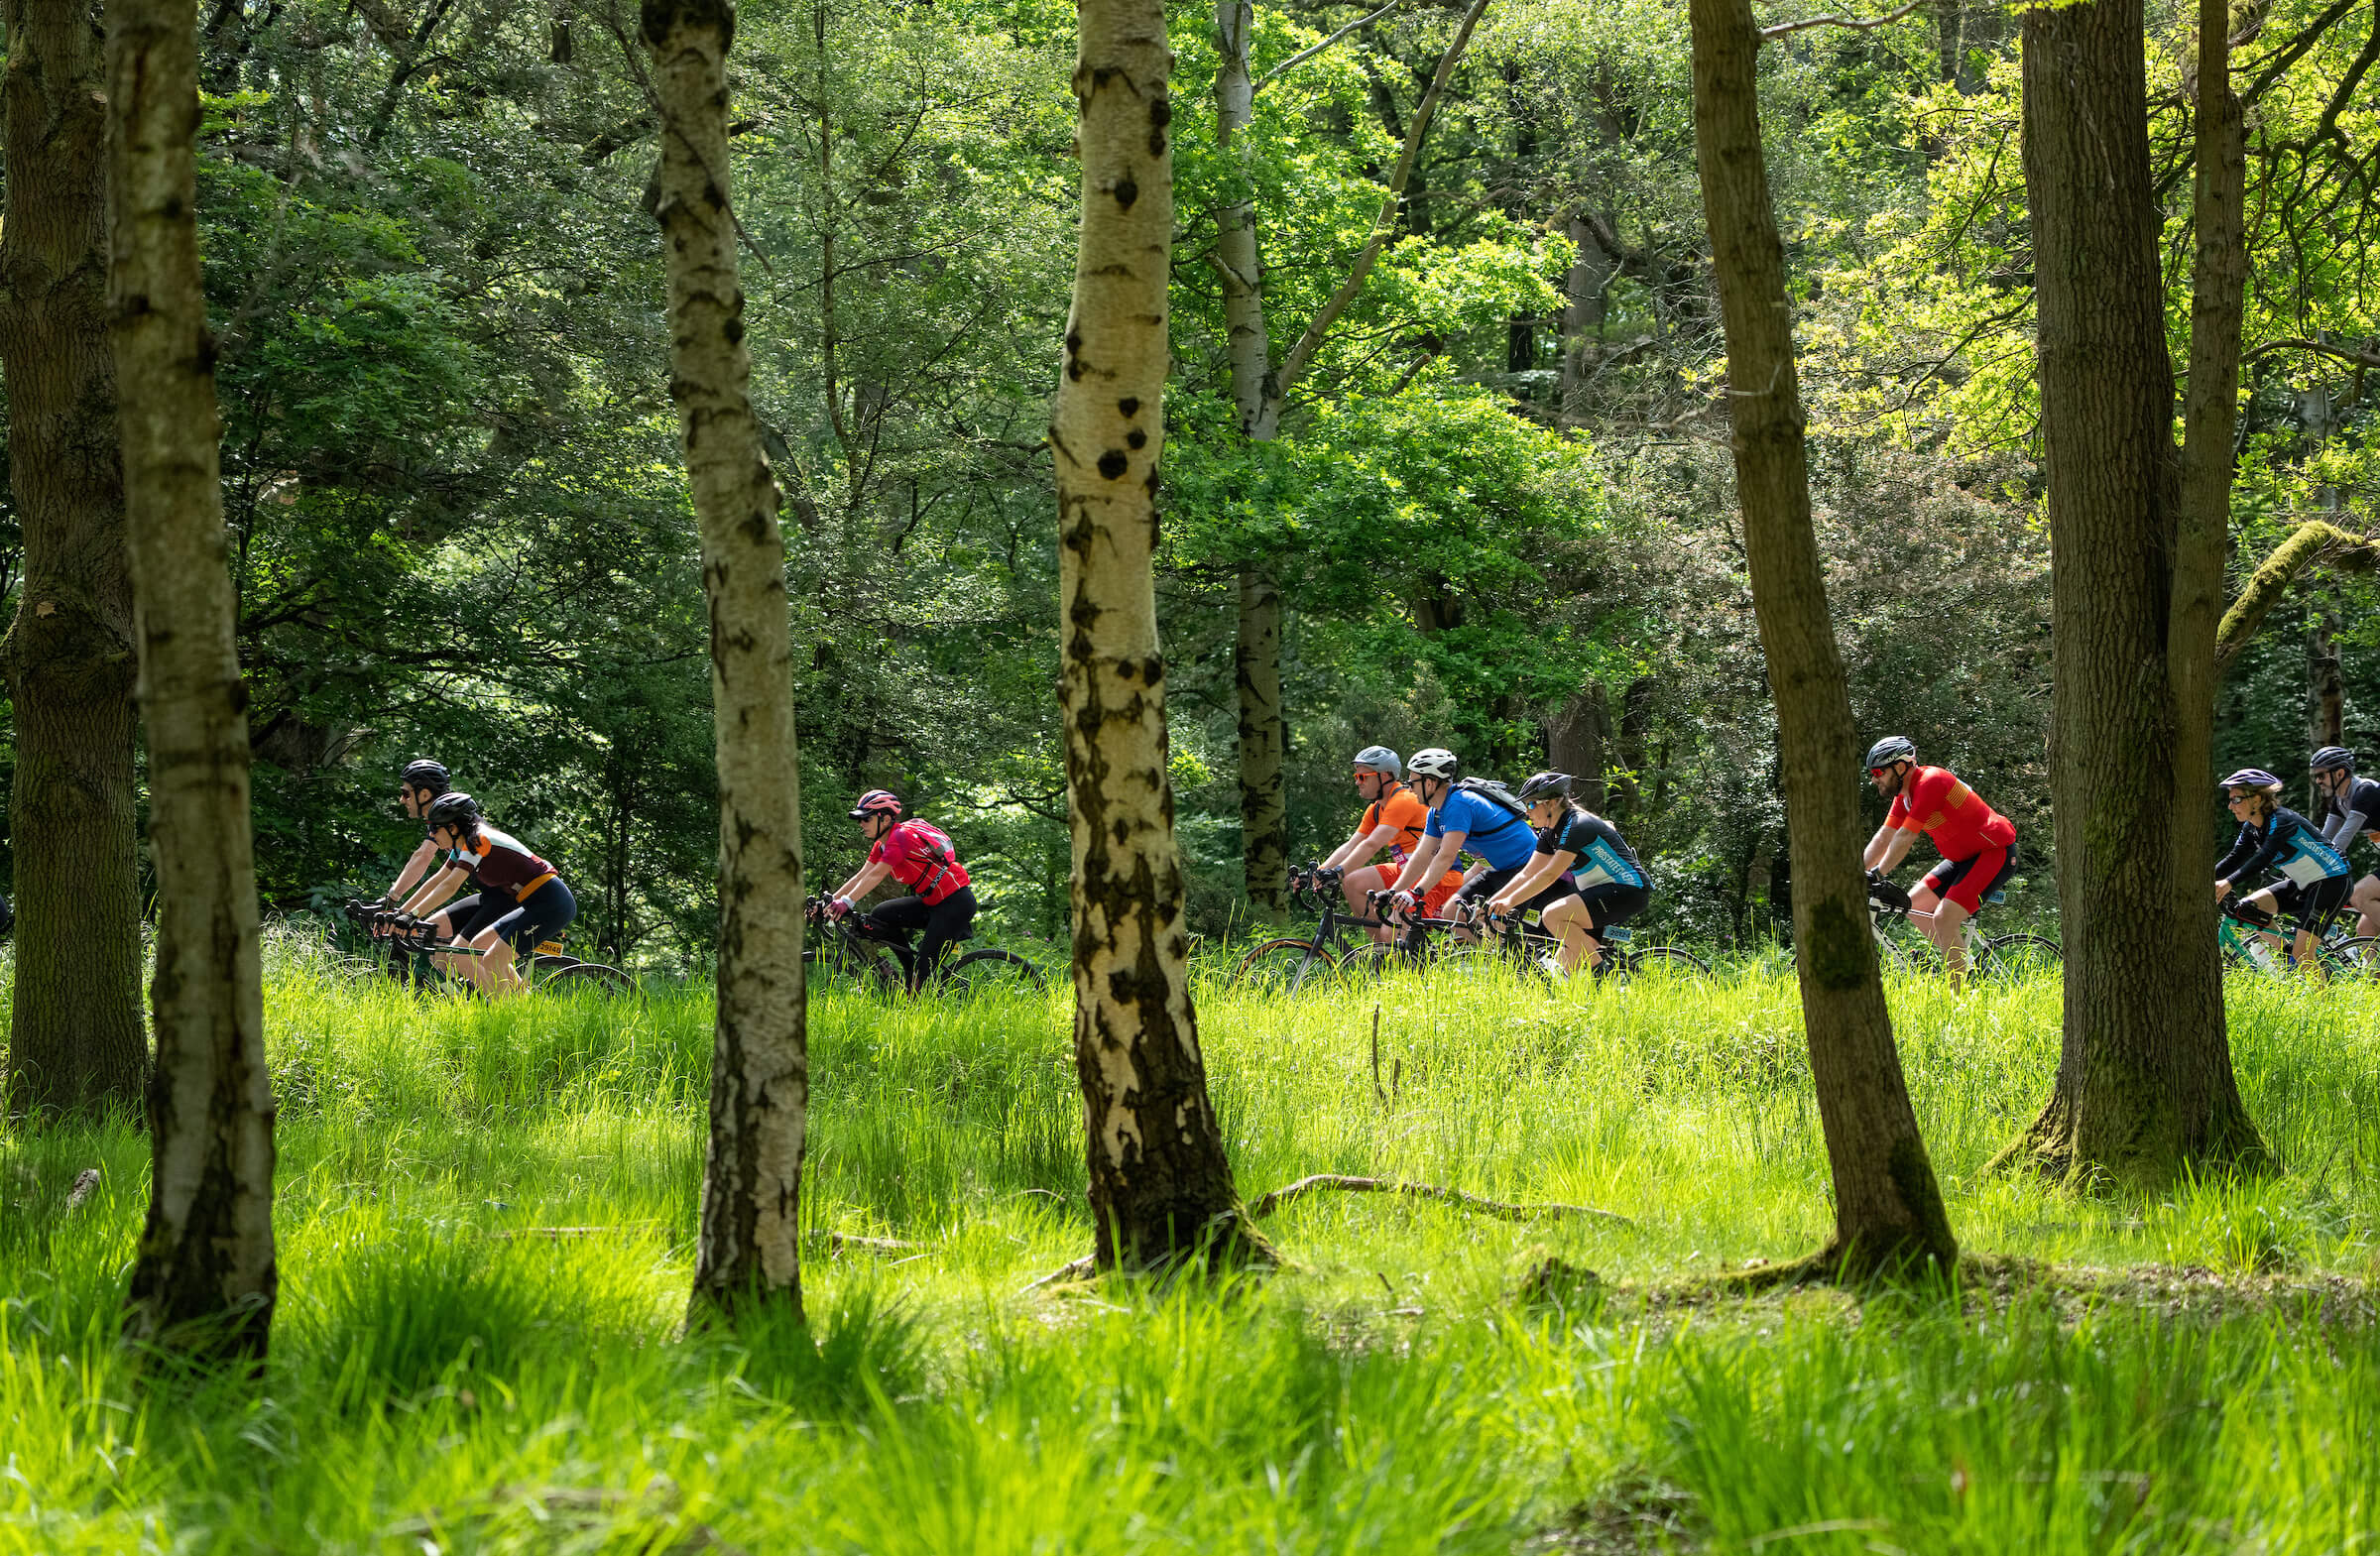 Riders cycling through a forest